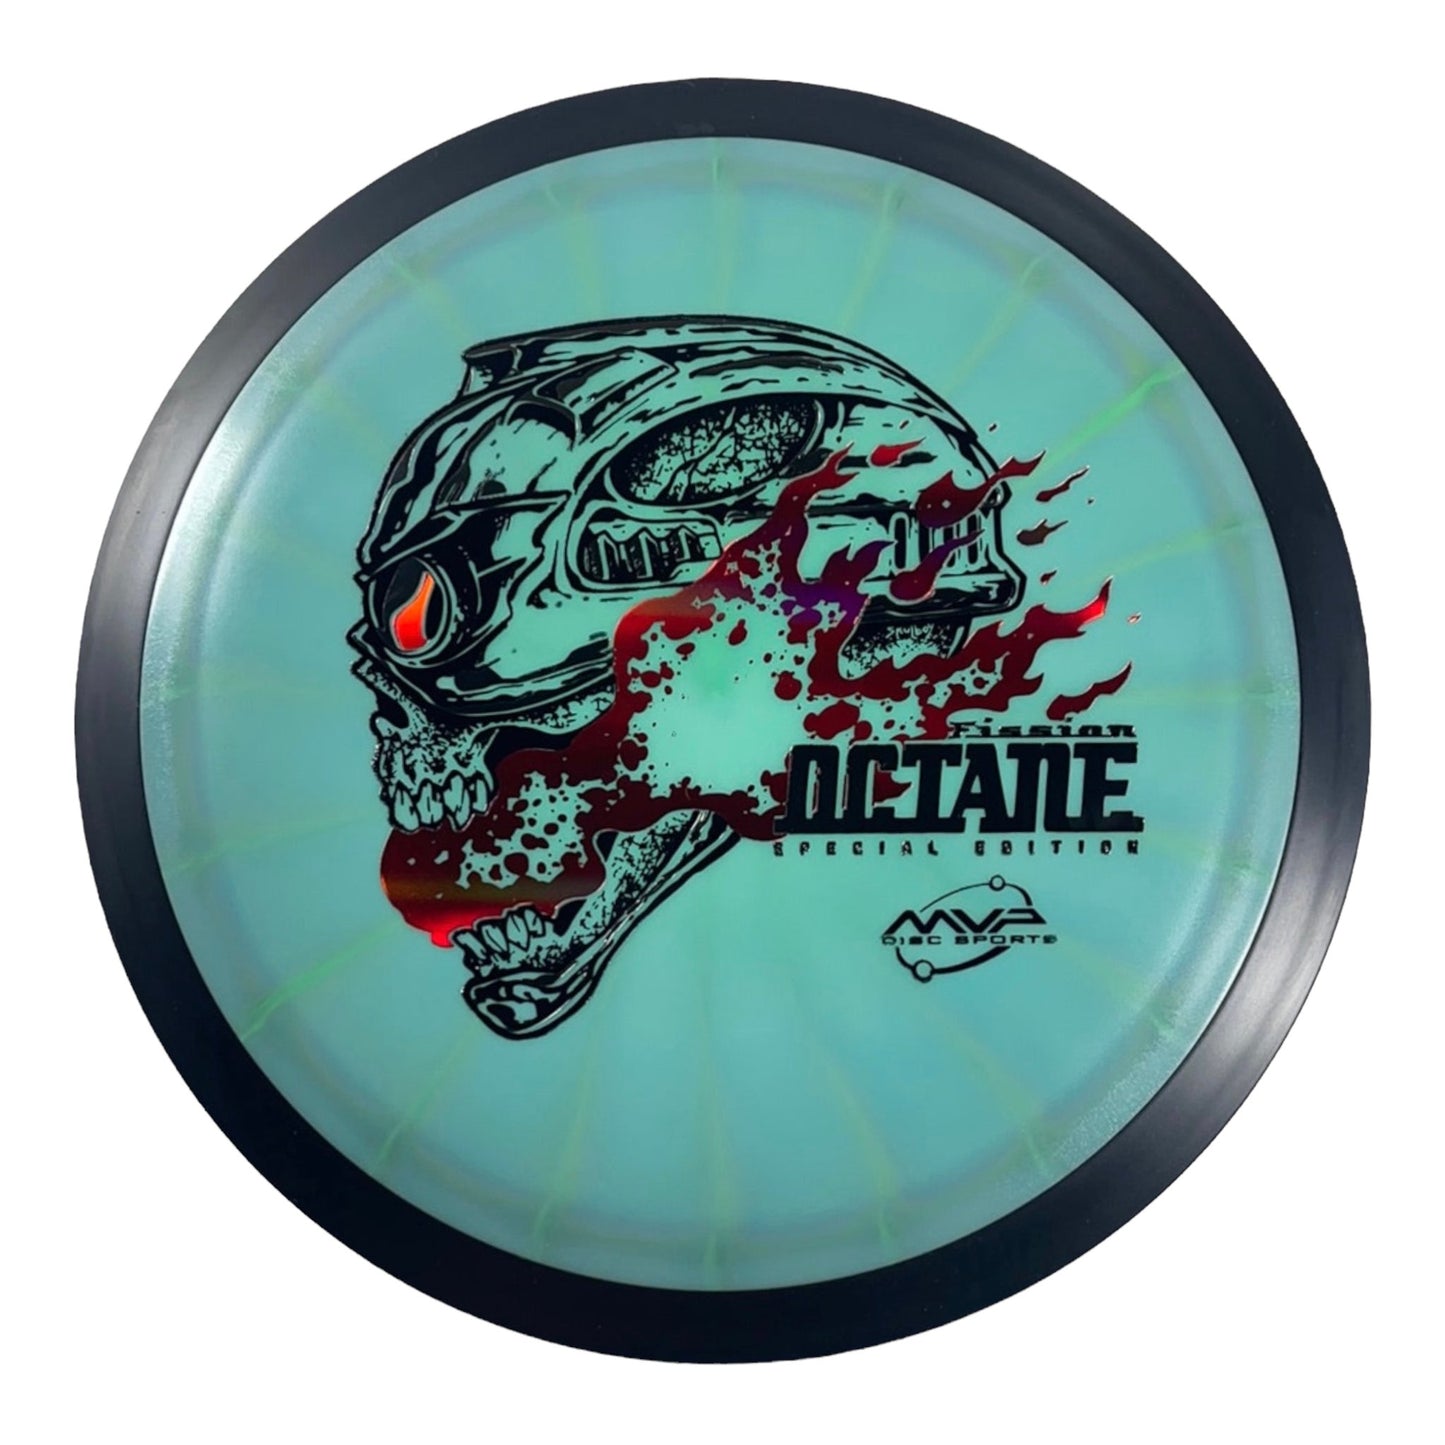 MVP Disc Sports Octane | Fission | Green/Red 171g (Special Edition) Disc Golf